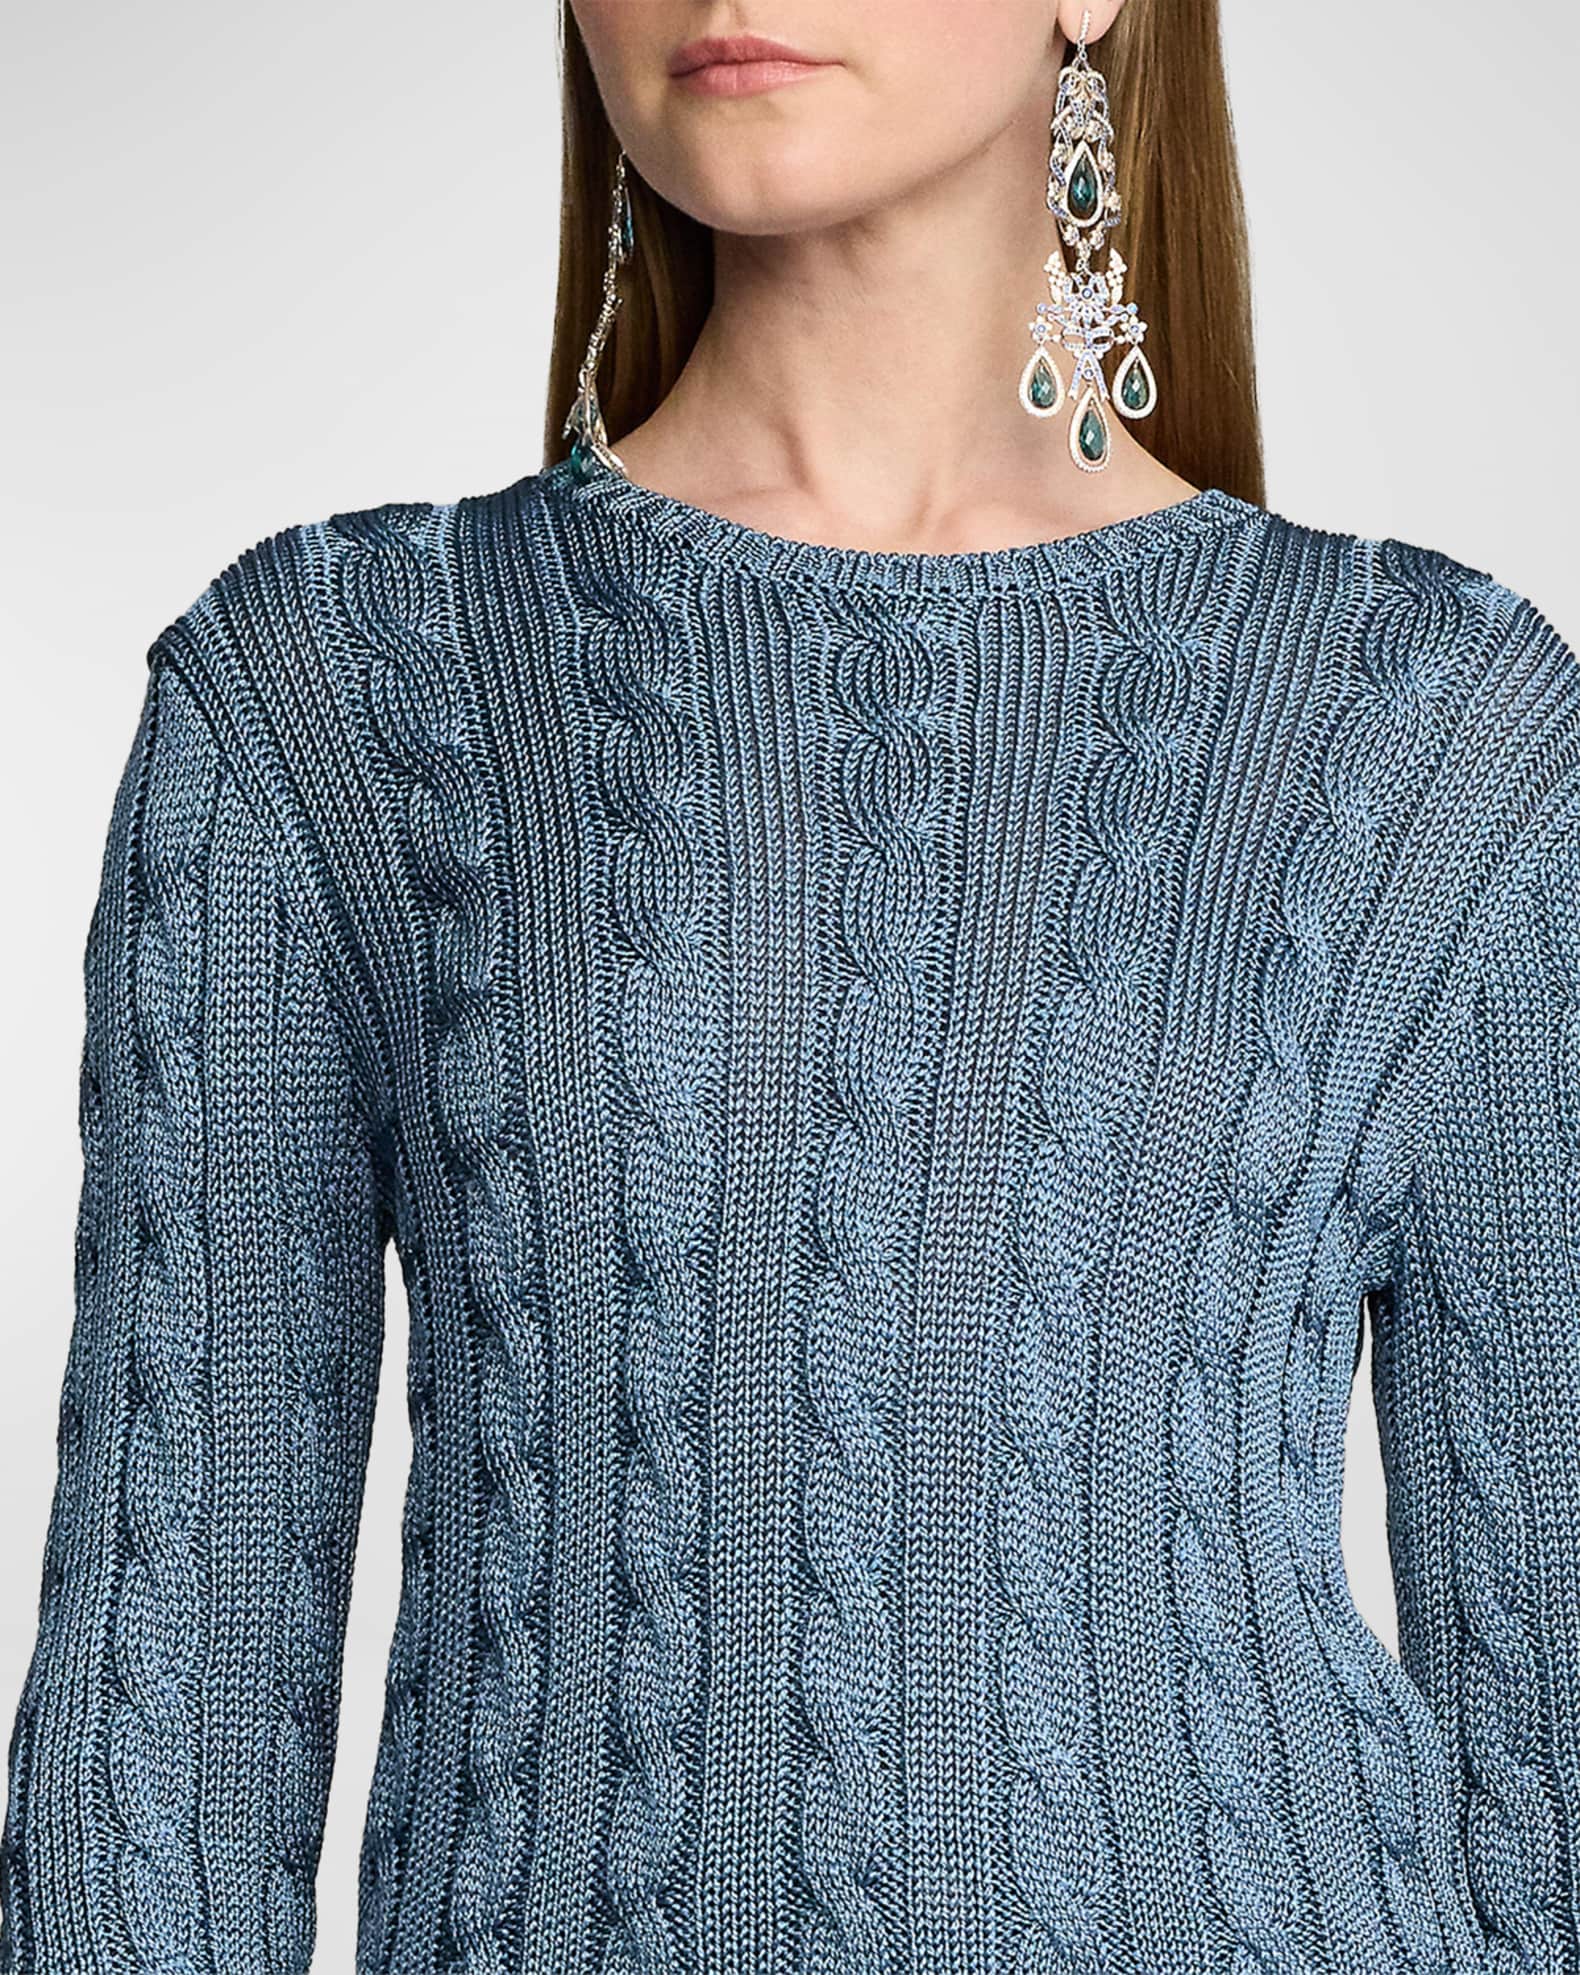 Ralph Lauren Collection High Shine Silk Cable Knit Crewneck Sweater, Blue, Women's, S, Sweaters Cable-Knit Sweaters